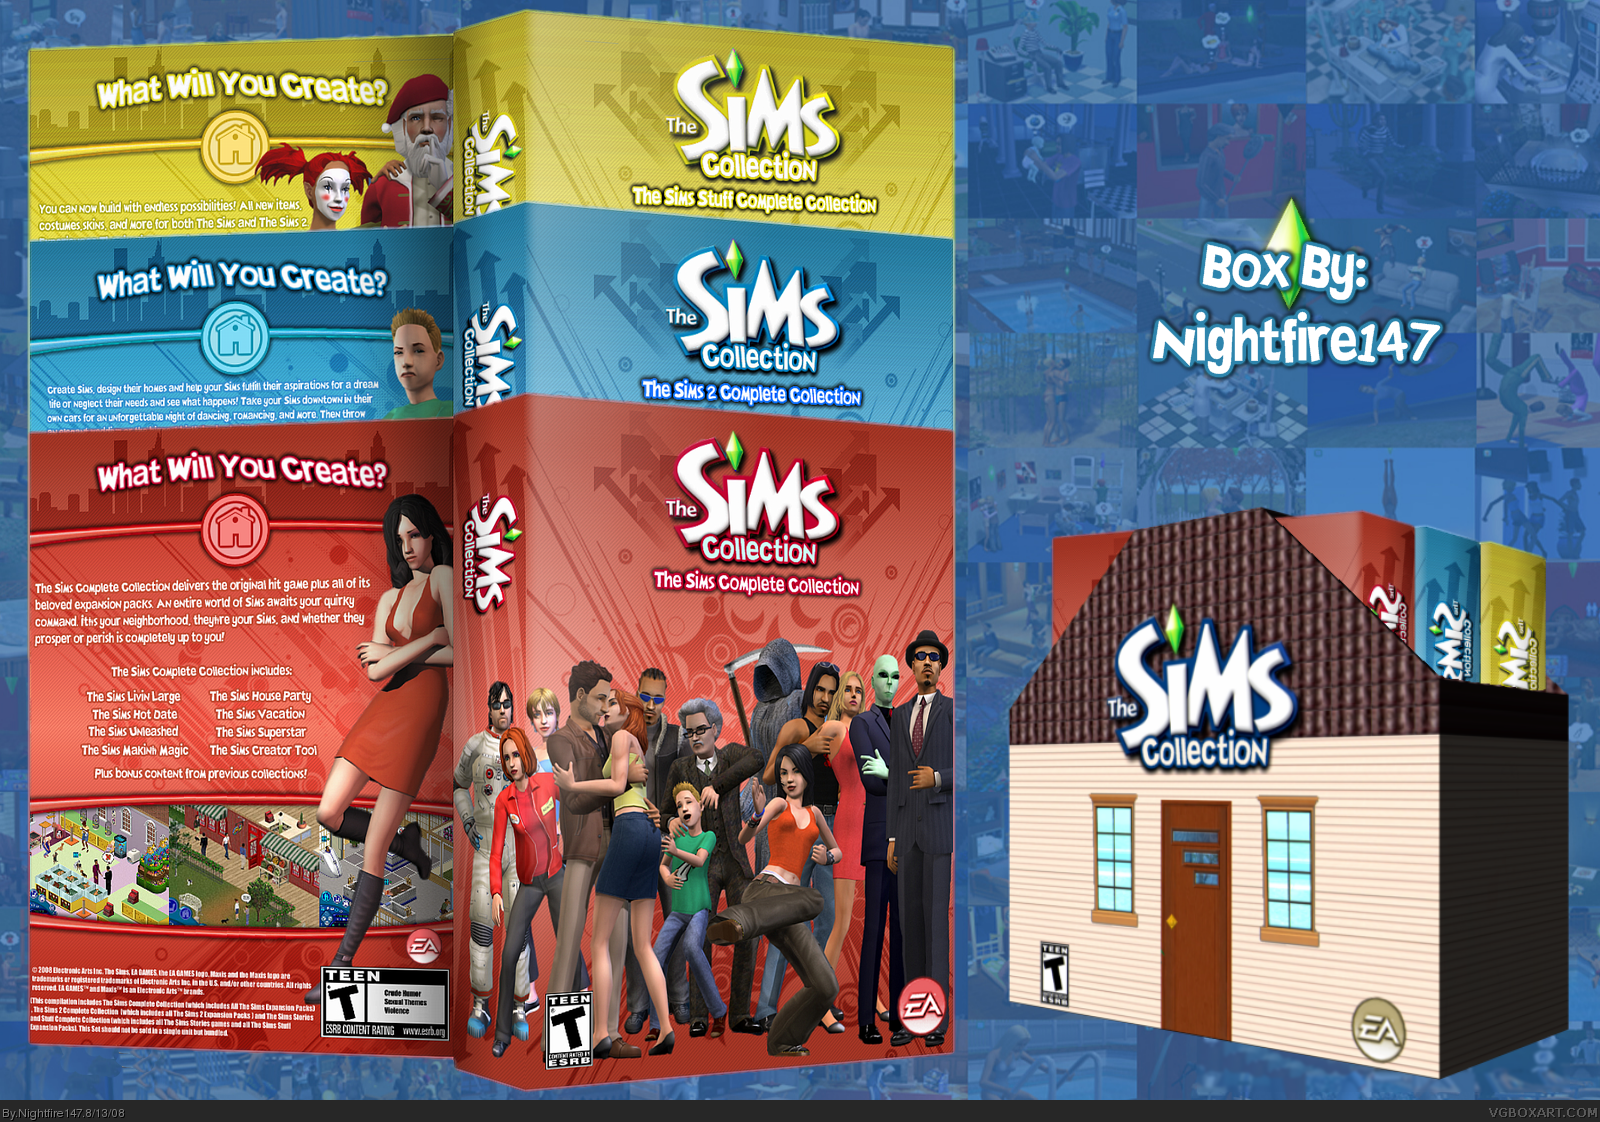 The Sims Collection box cover